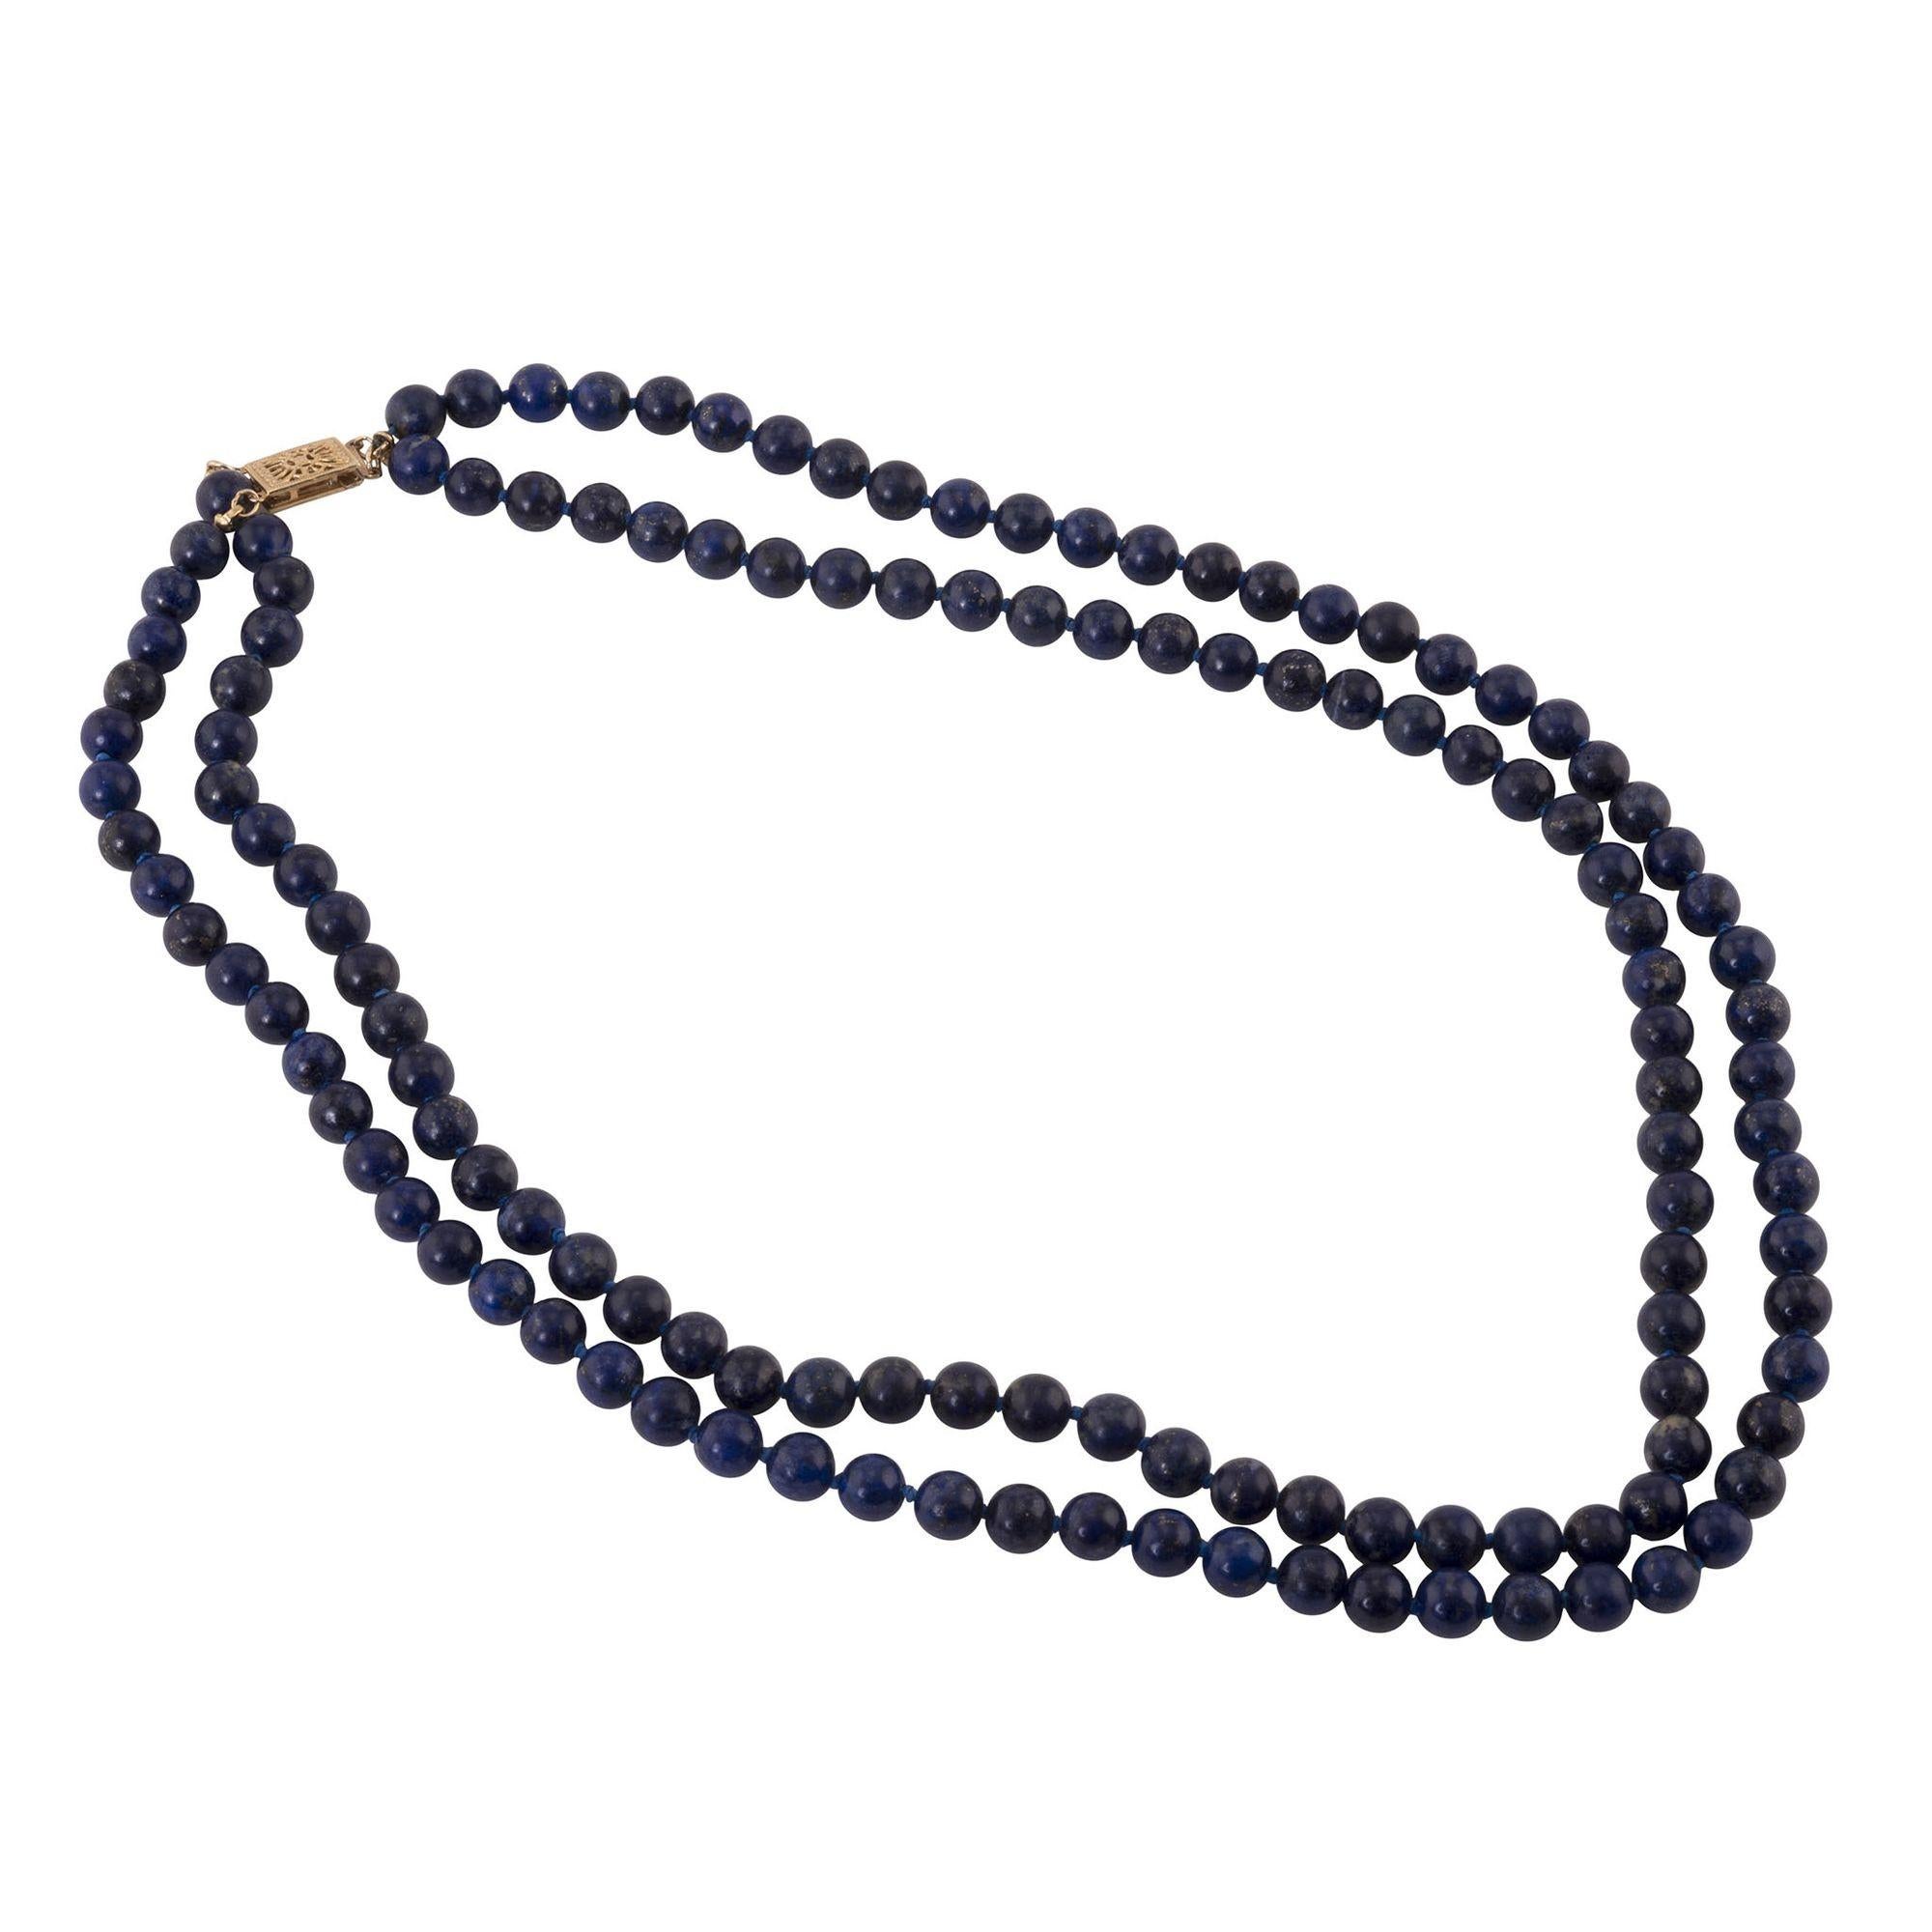 Estate double strand lapis bead necklace. This necklace features two strands of knotted lapis beads with a 14 karat yellow gold clasp. [RHAW 59]

Dimensions
18″L; 6.3mm beads